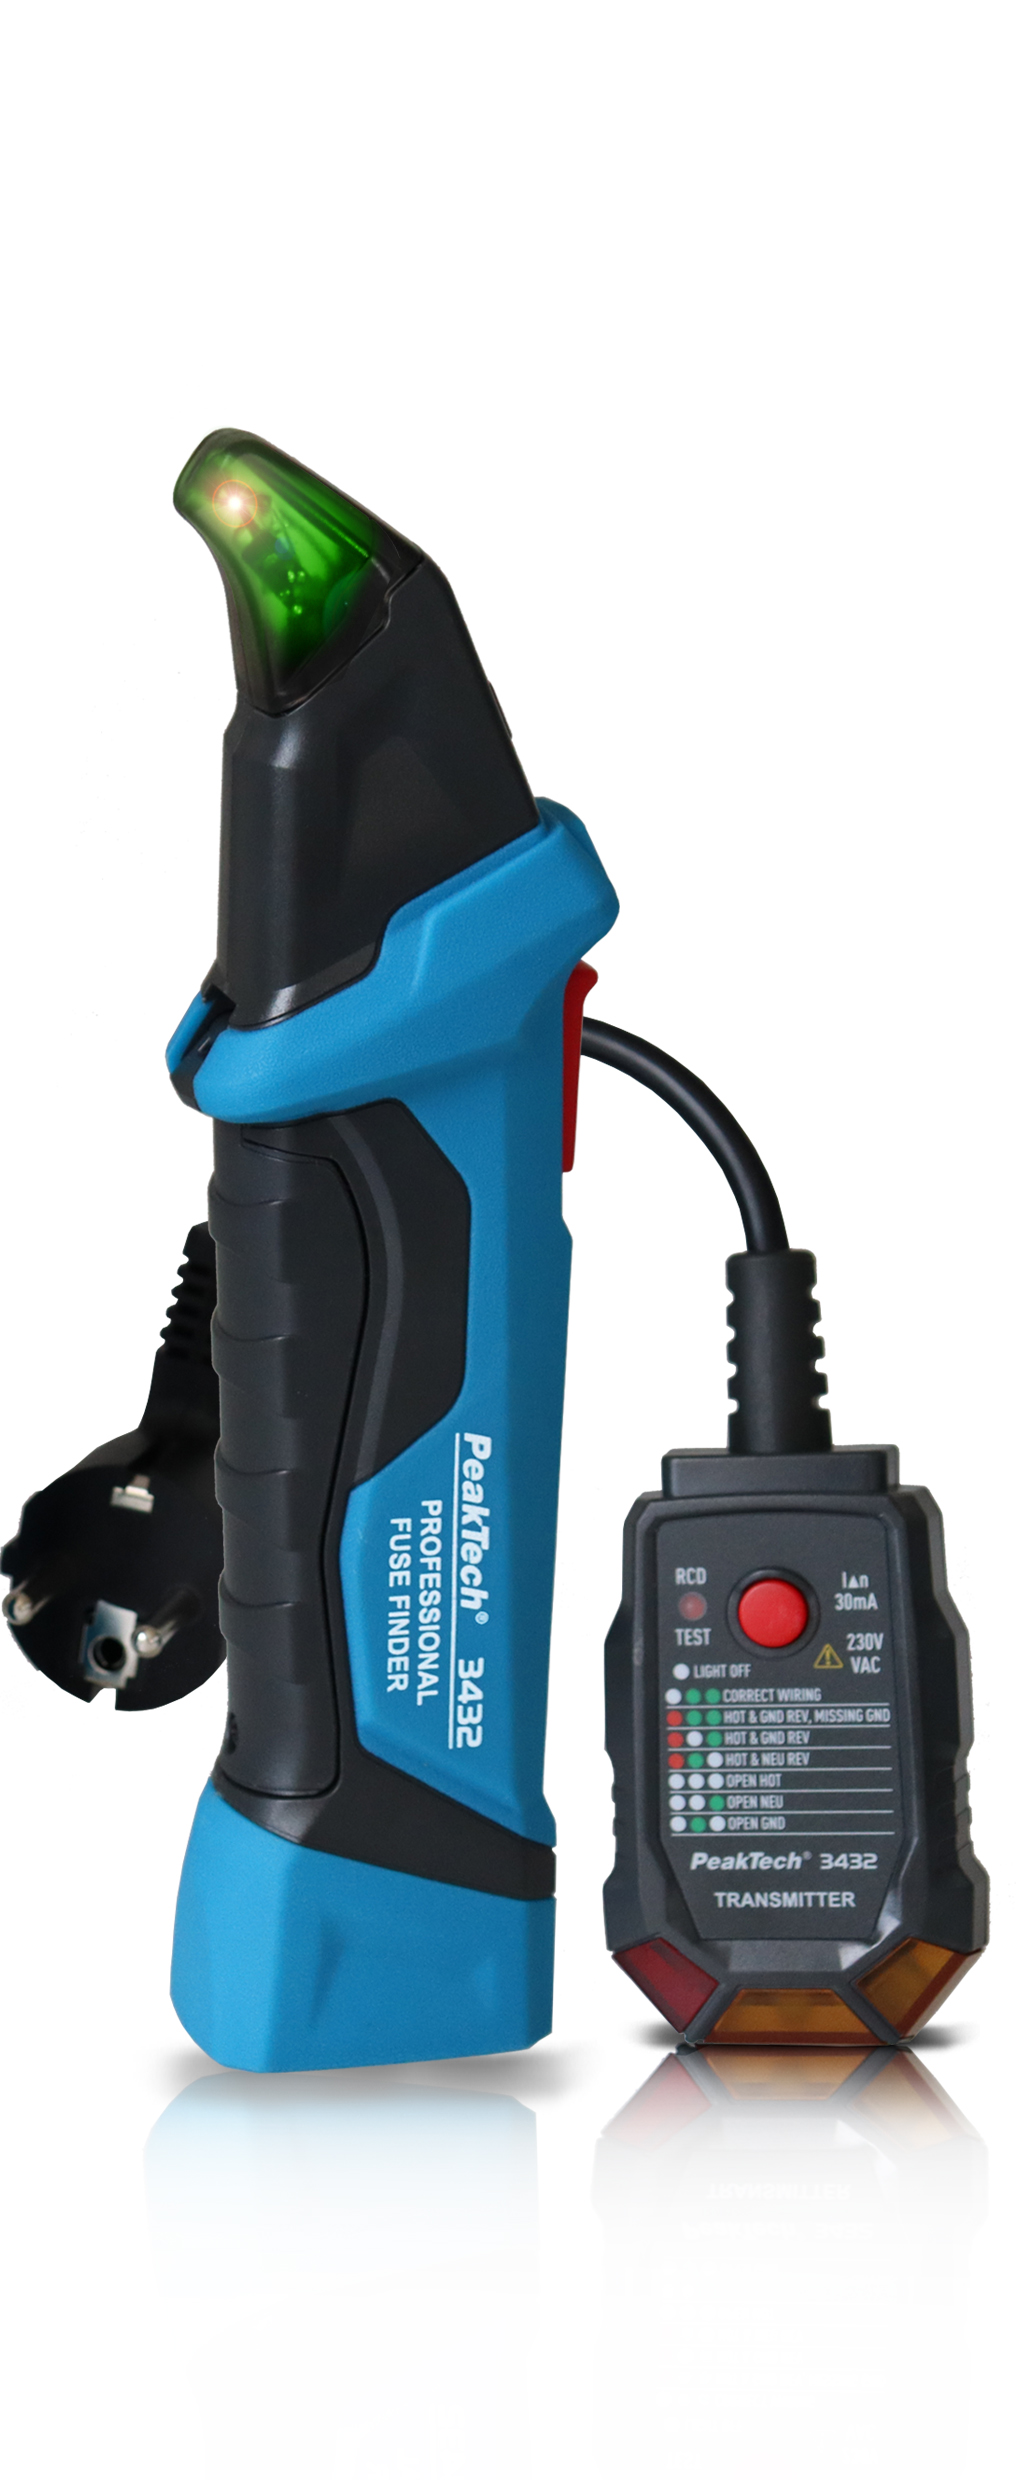 «PeakTech® P 3432» Fuse finder with RCD tester